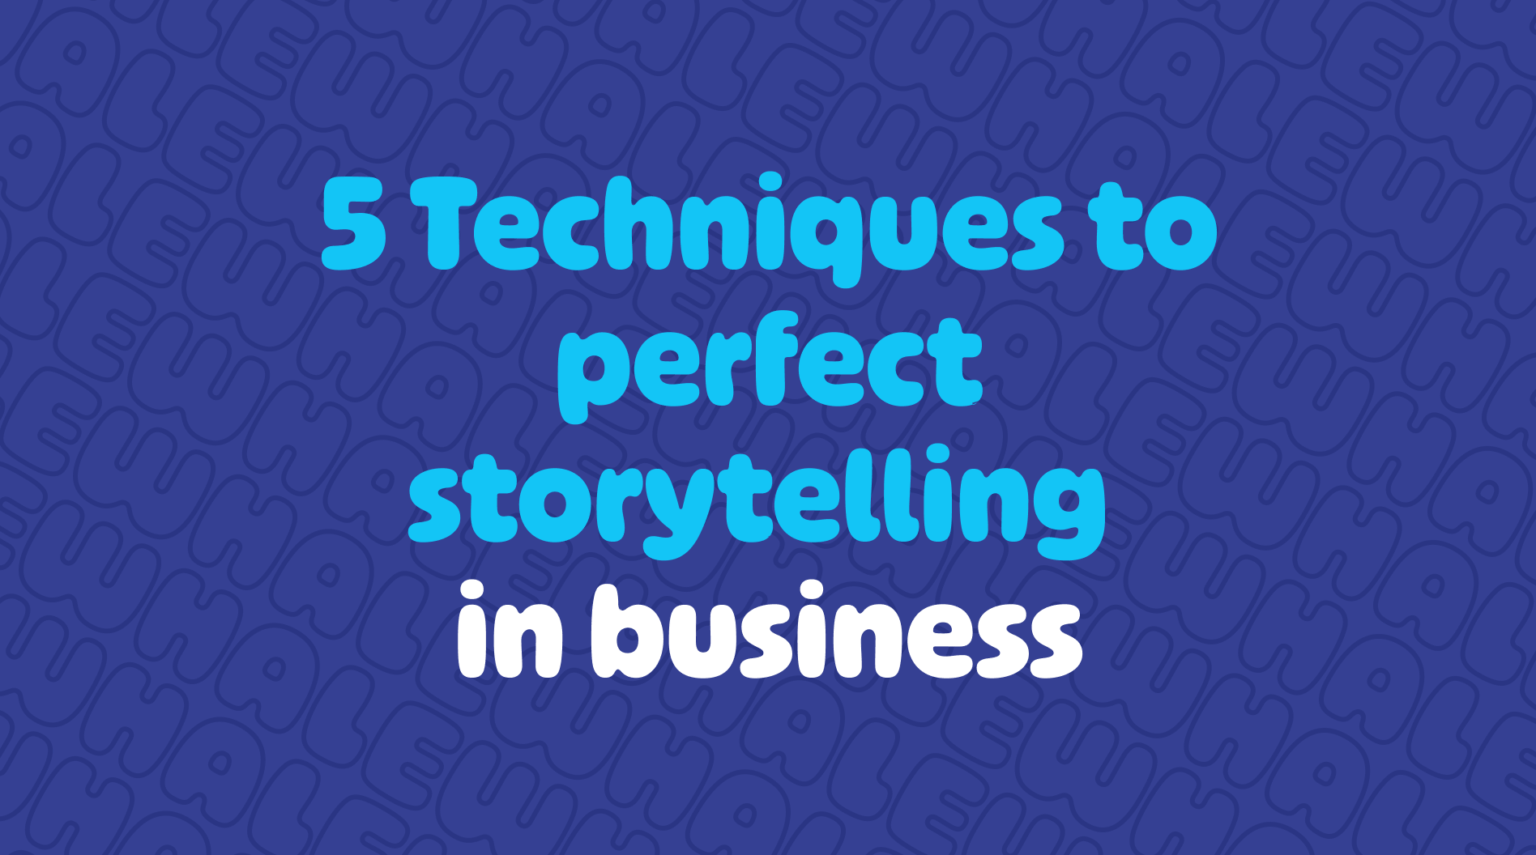 5 techniques to perfect storytelling in business.